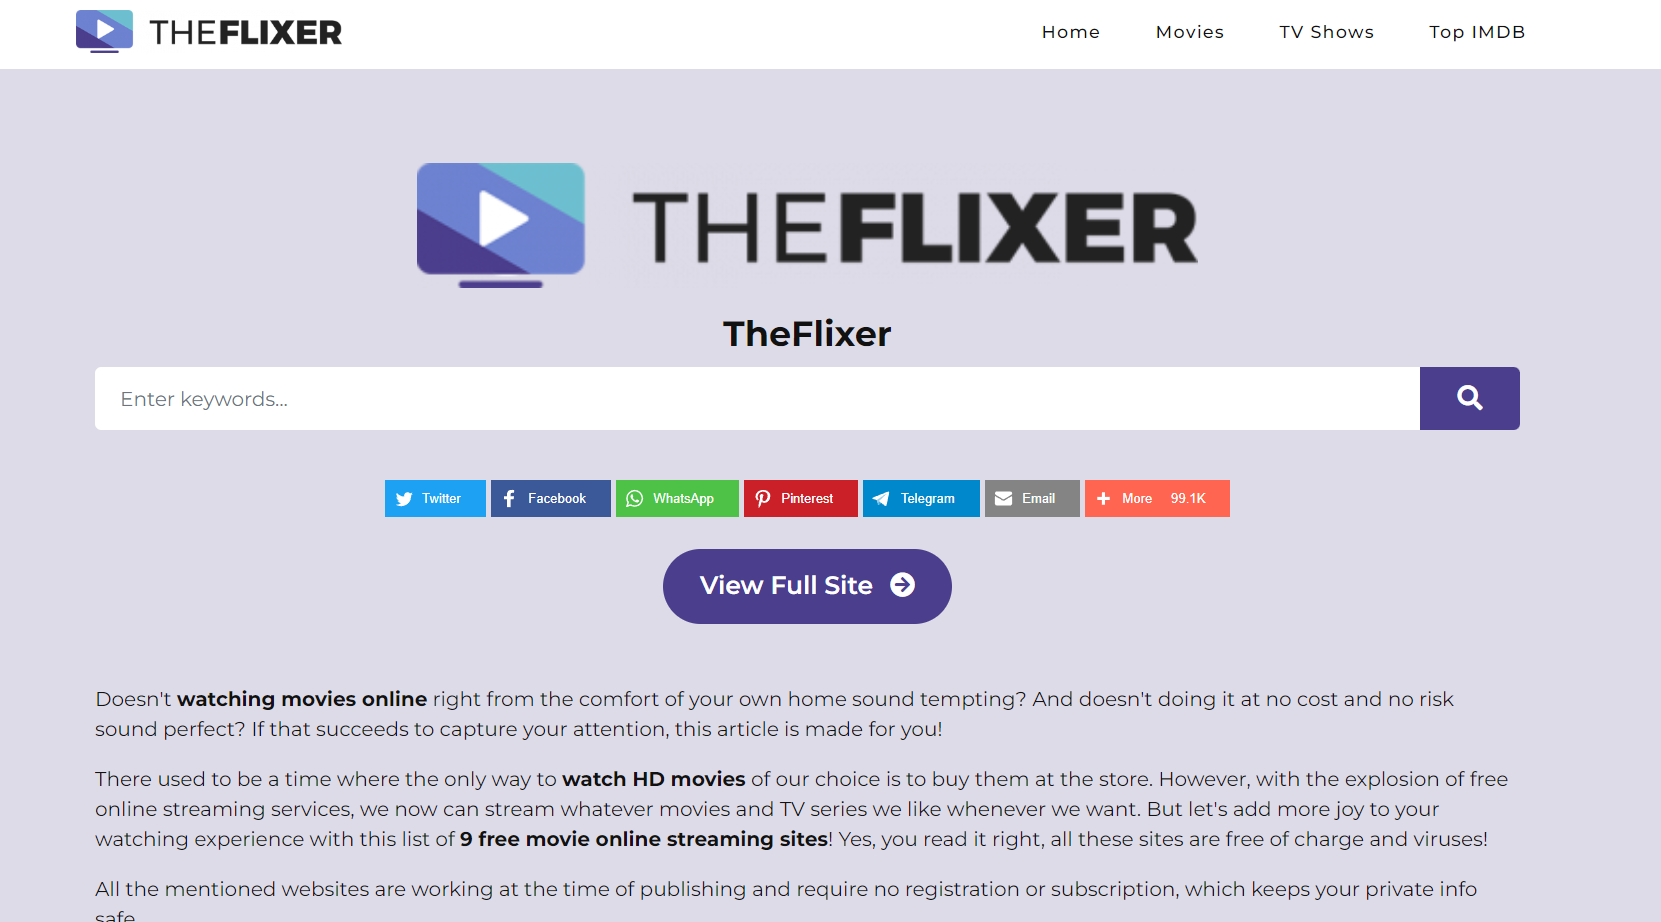 TheFlixer Overview